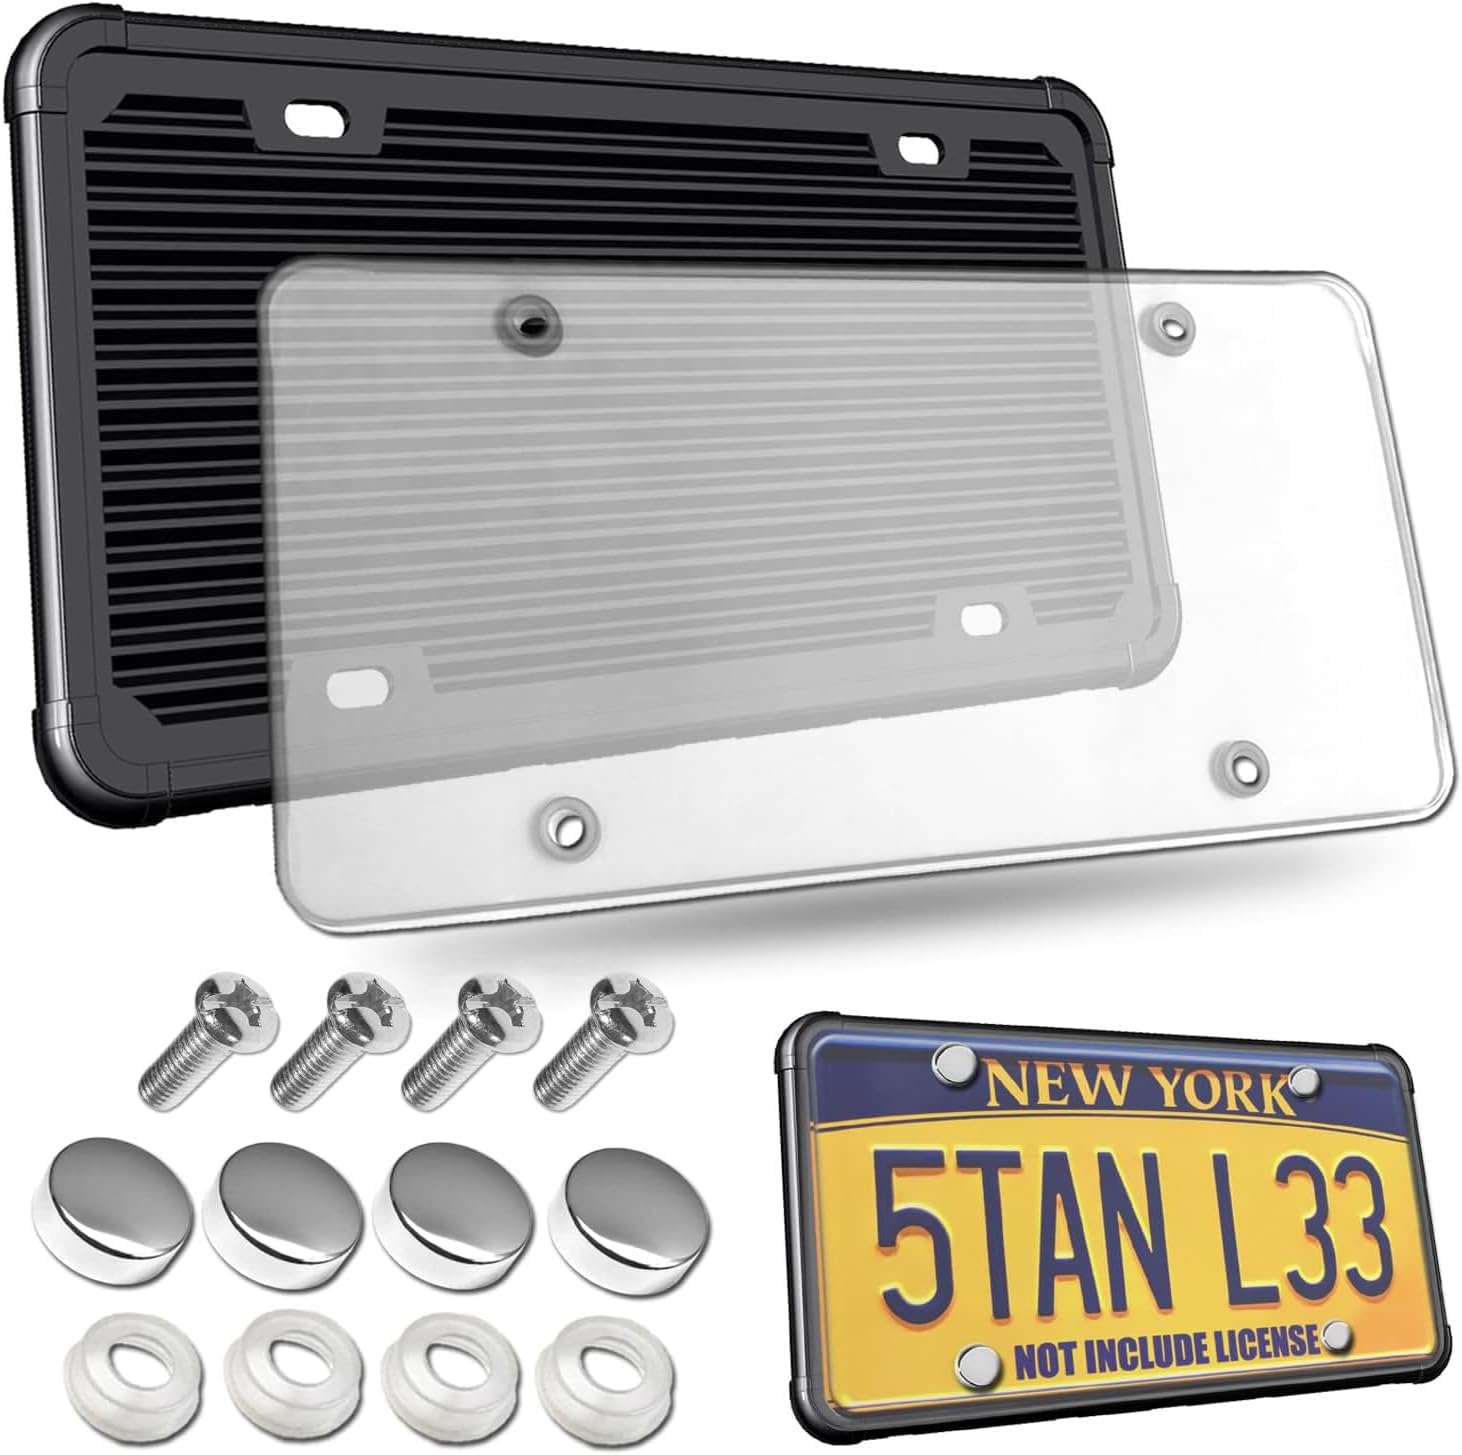 Clear License Plate Cover